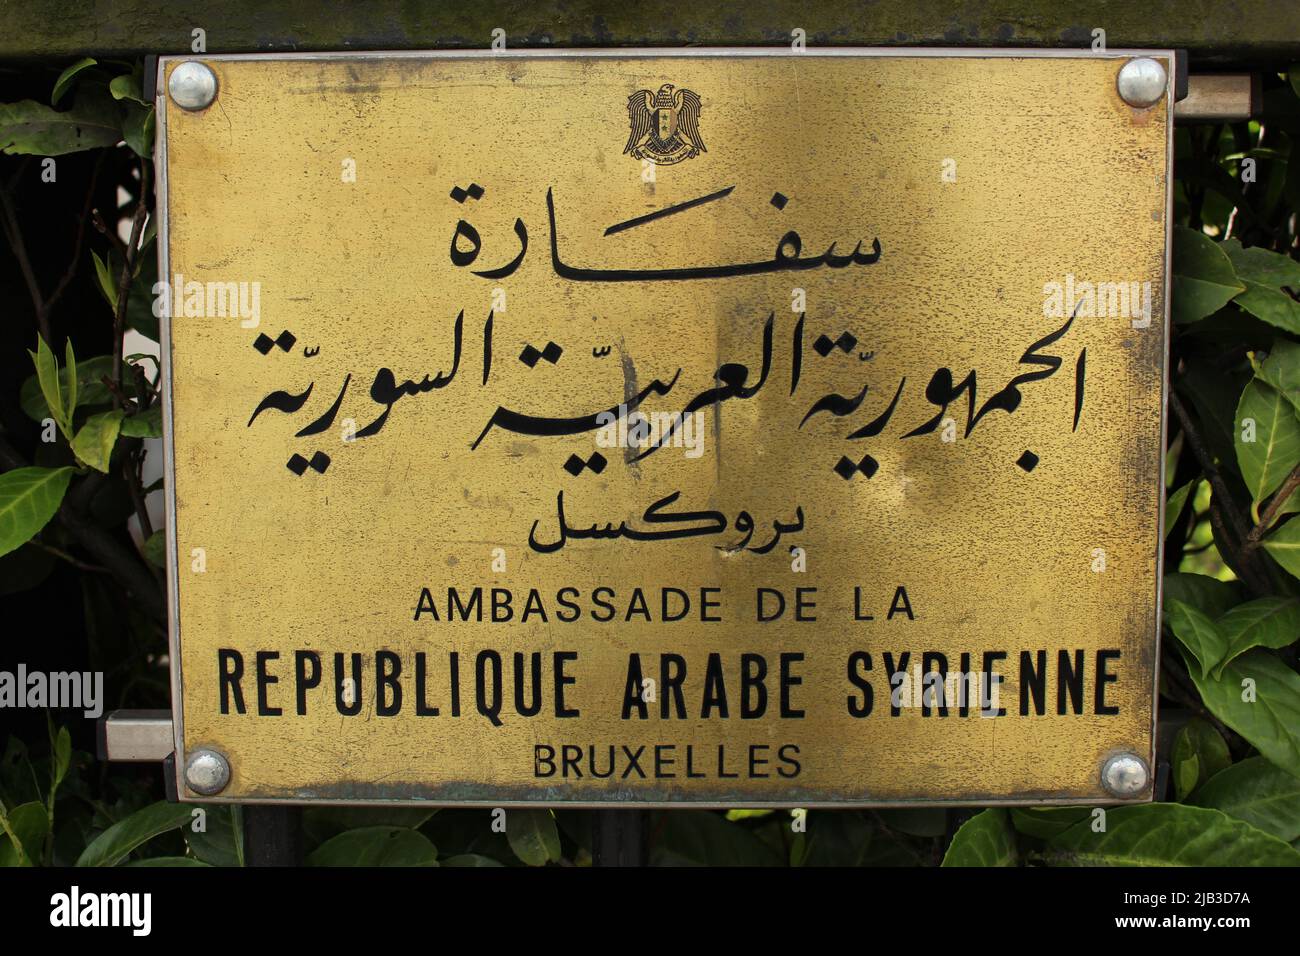 Plaque outside the Embassy of Syria in Ixelles, Brussels, Belgium. Embassy of the Syrian Arab Republic in Brussels sign. Stock Photo